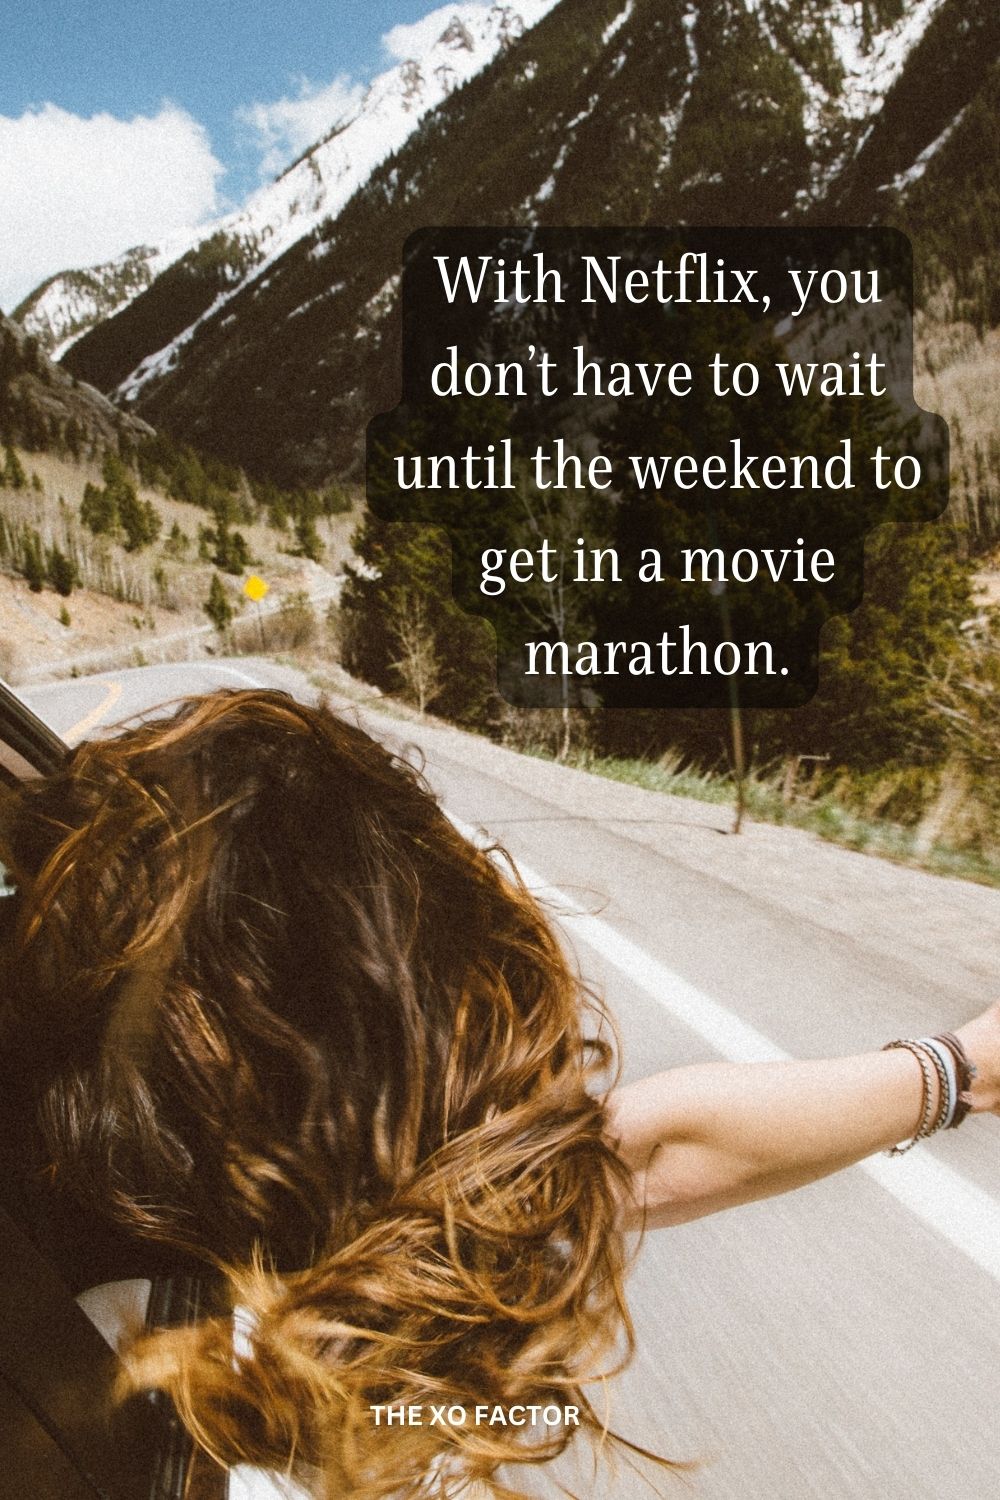 With Netflix, you don’t have to wait until the weekend to get in a movie marathon.